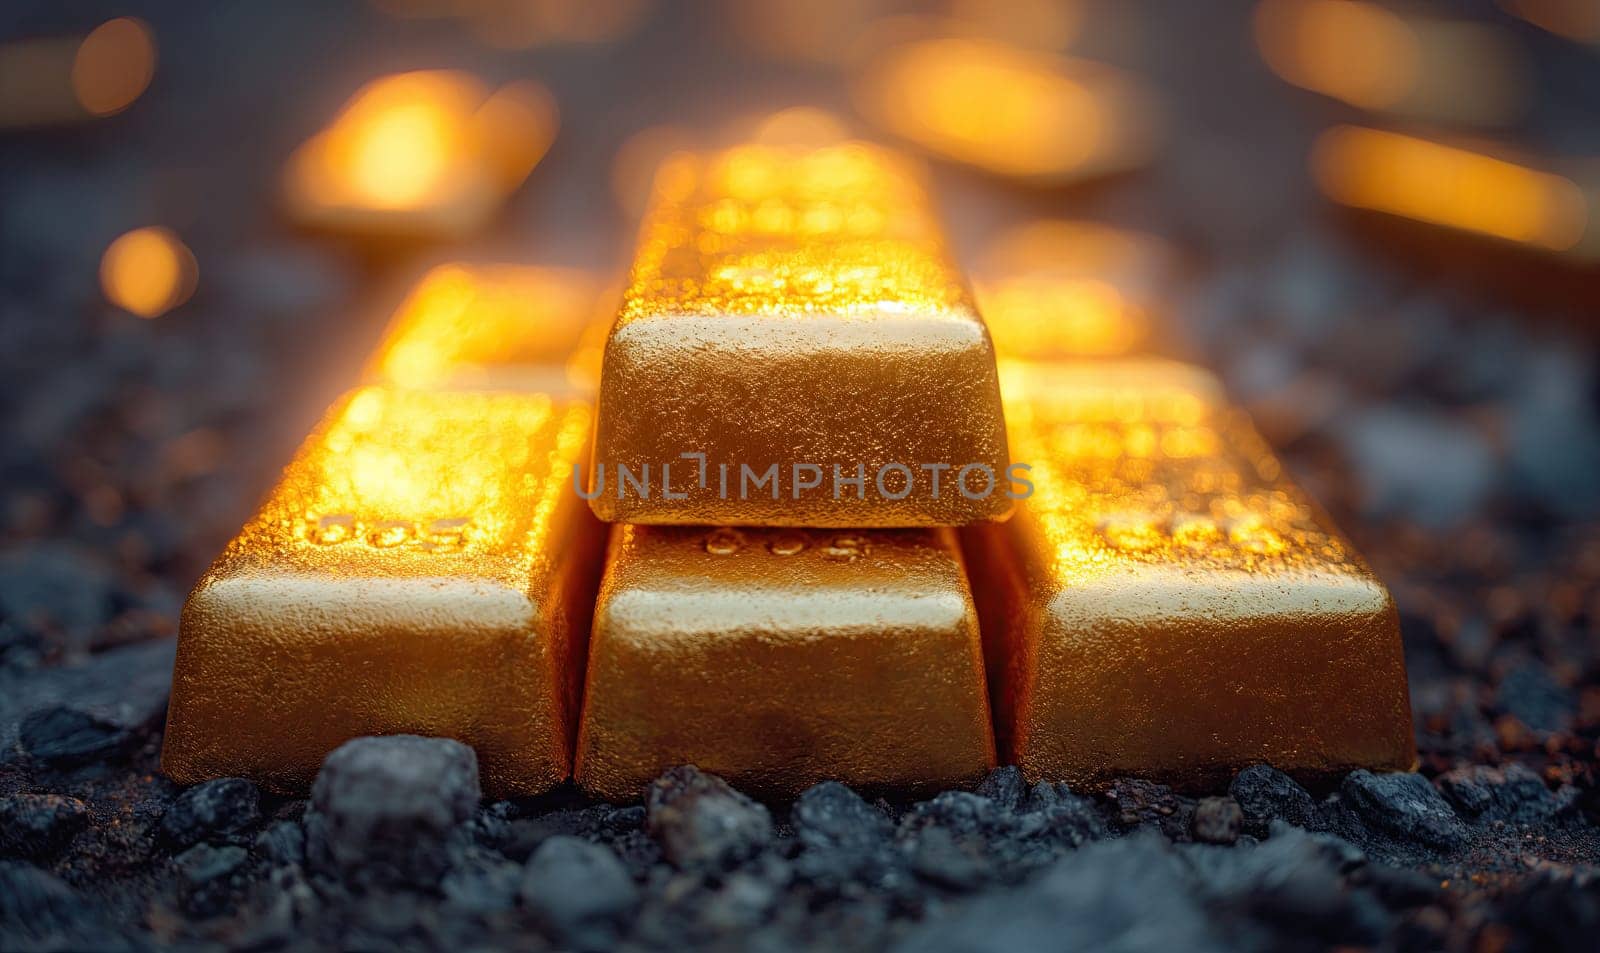 Abstract gold bars as a textural background. Selective soft focus.